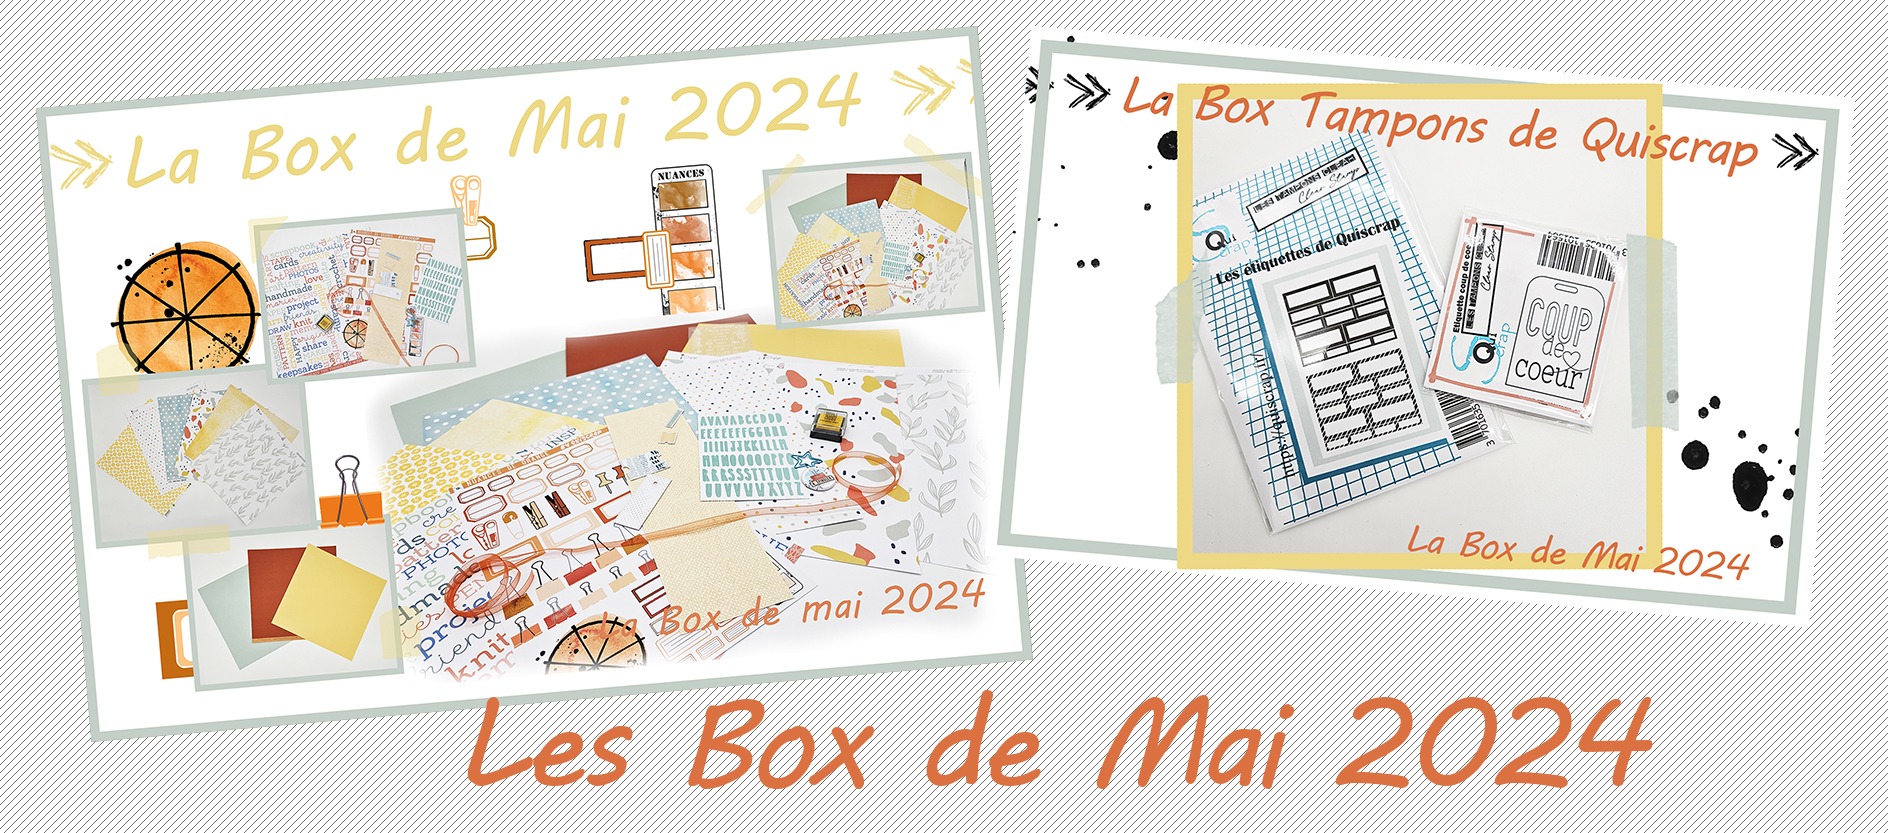 You are currently viewing Les Box de Mai 2024